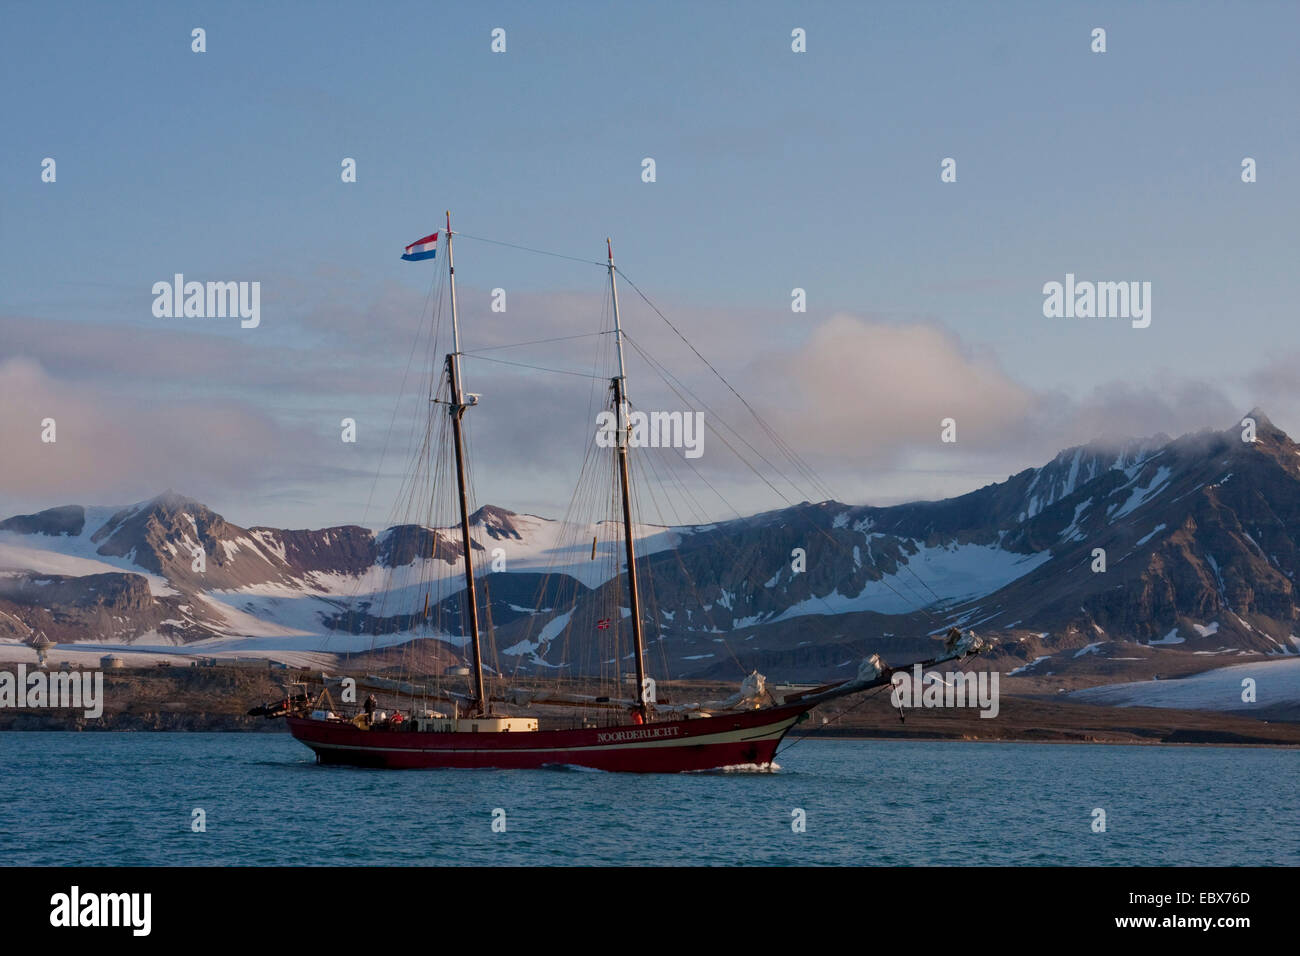 two-masted sailing ship in a fjord, Norway, Svalbard, Kongsfjorden Stock Photo